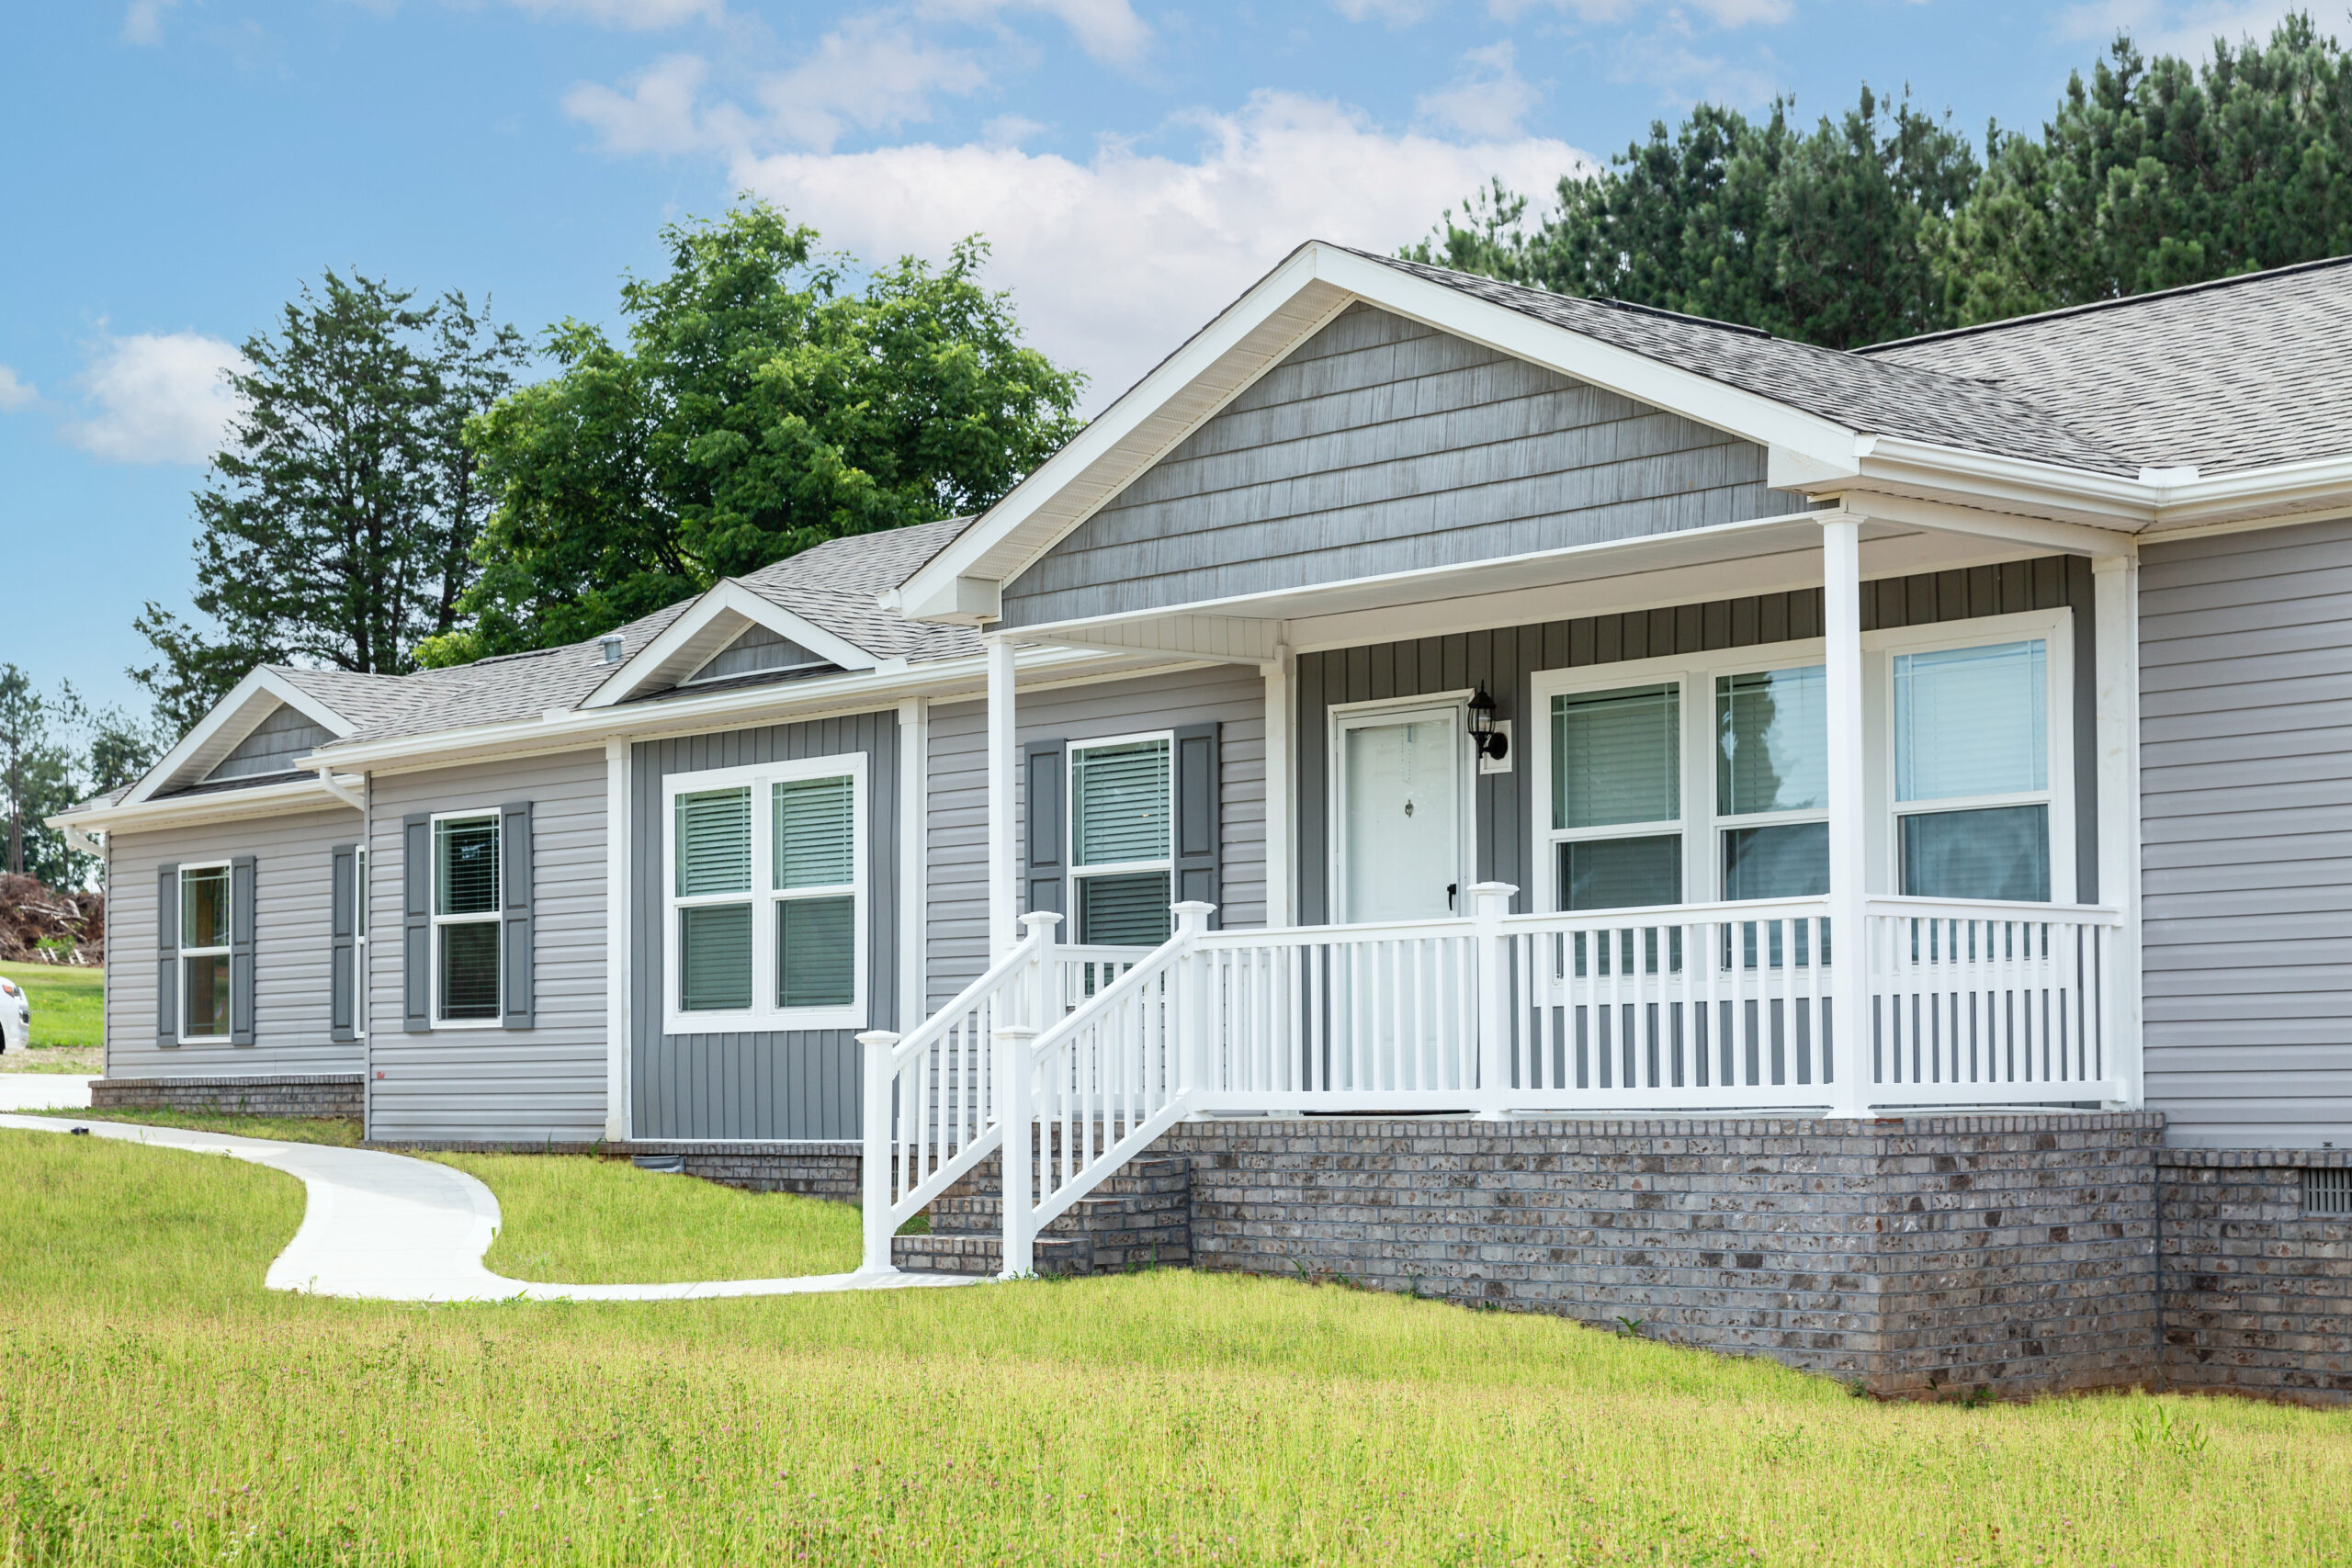 Advantages of Owning a Mobile Home